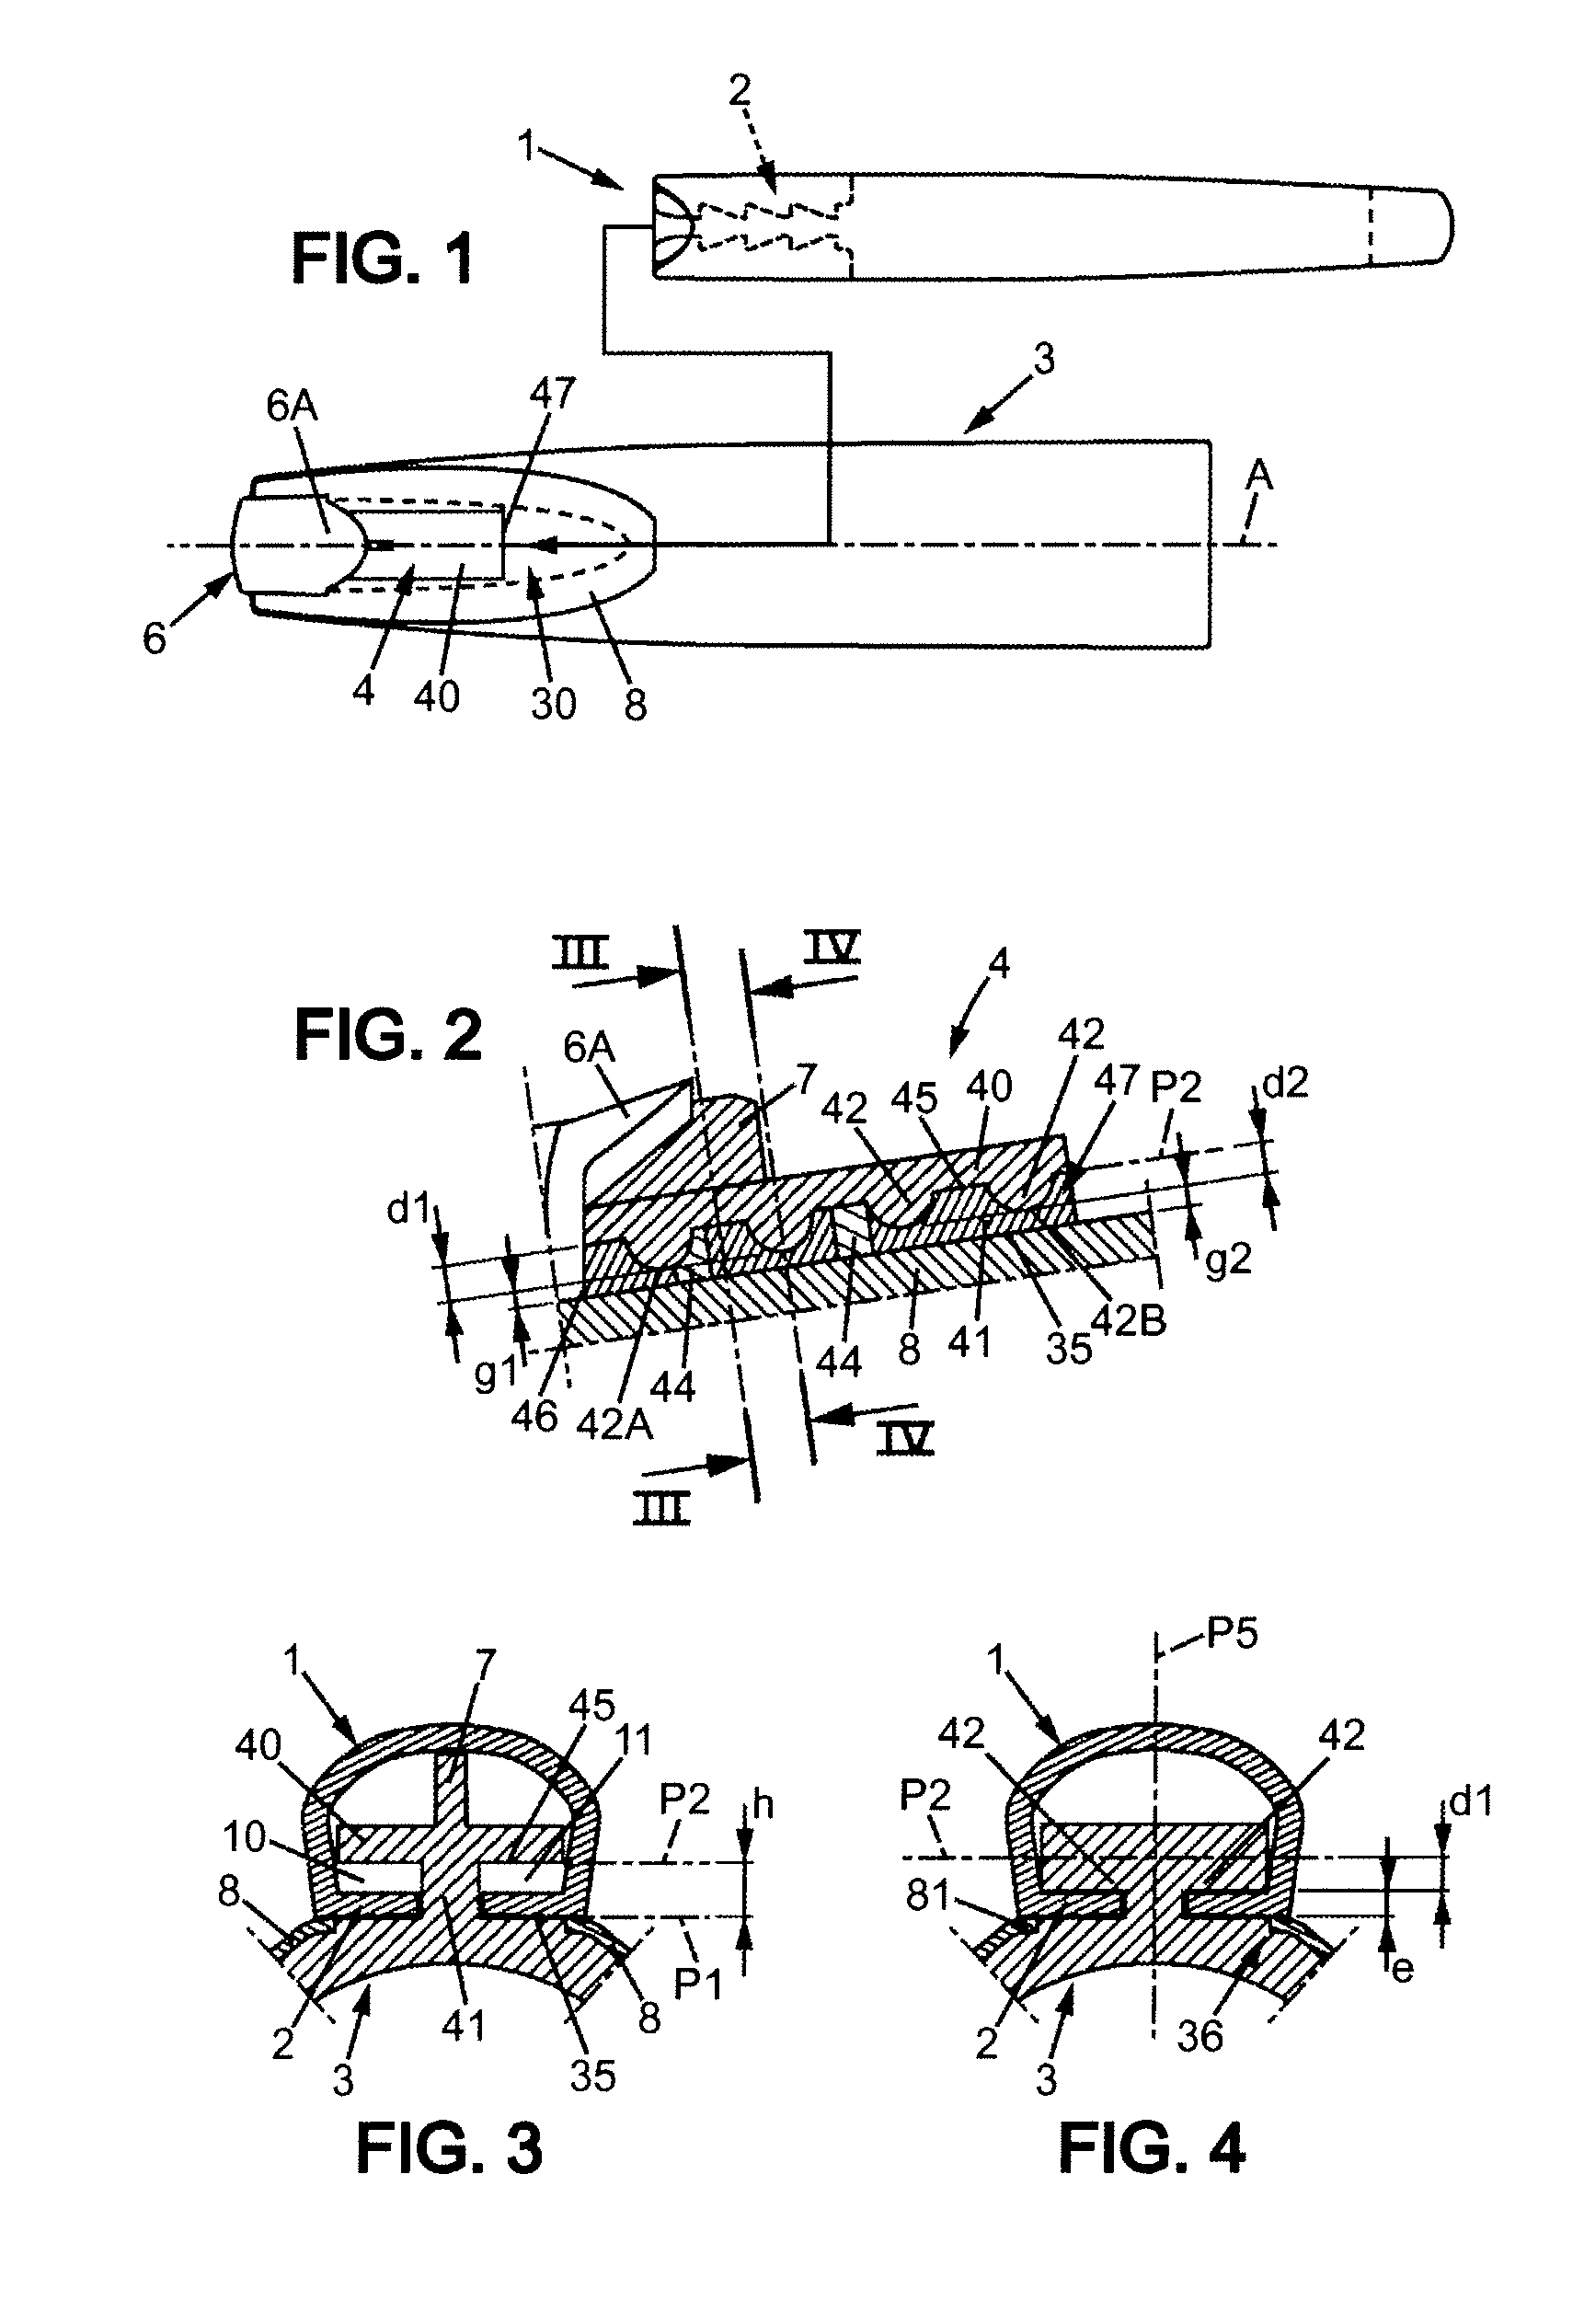 Structure for mounting a clip for a writing implement